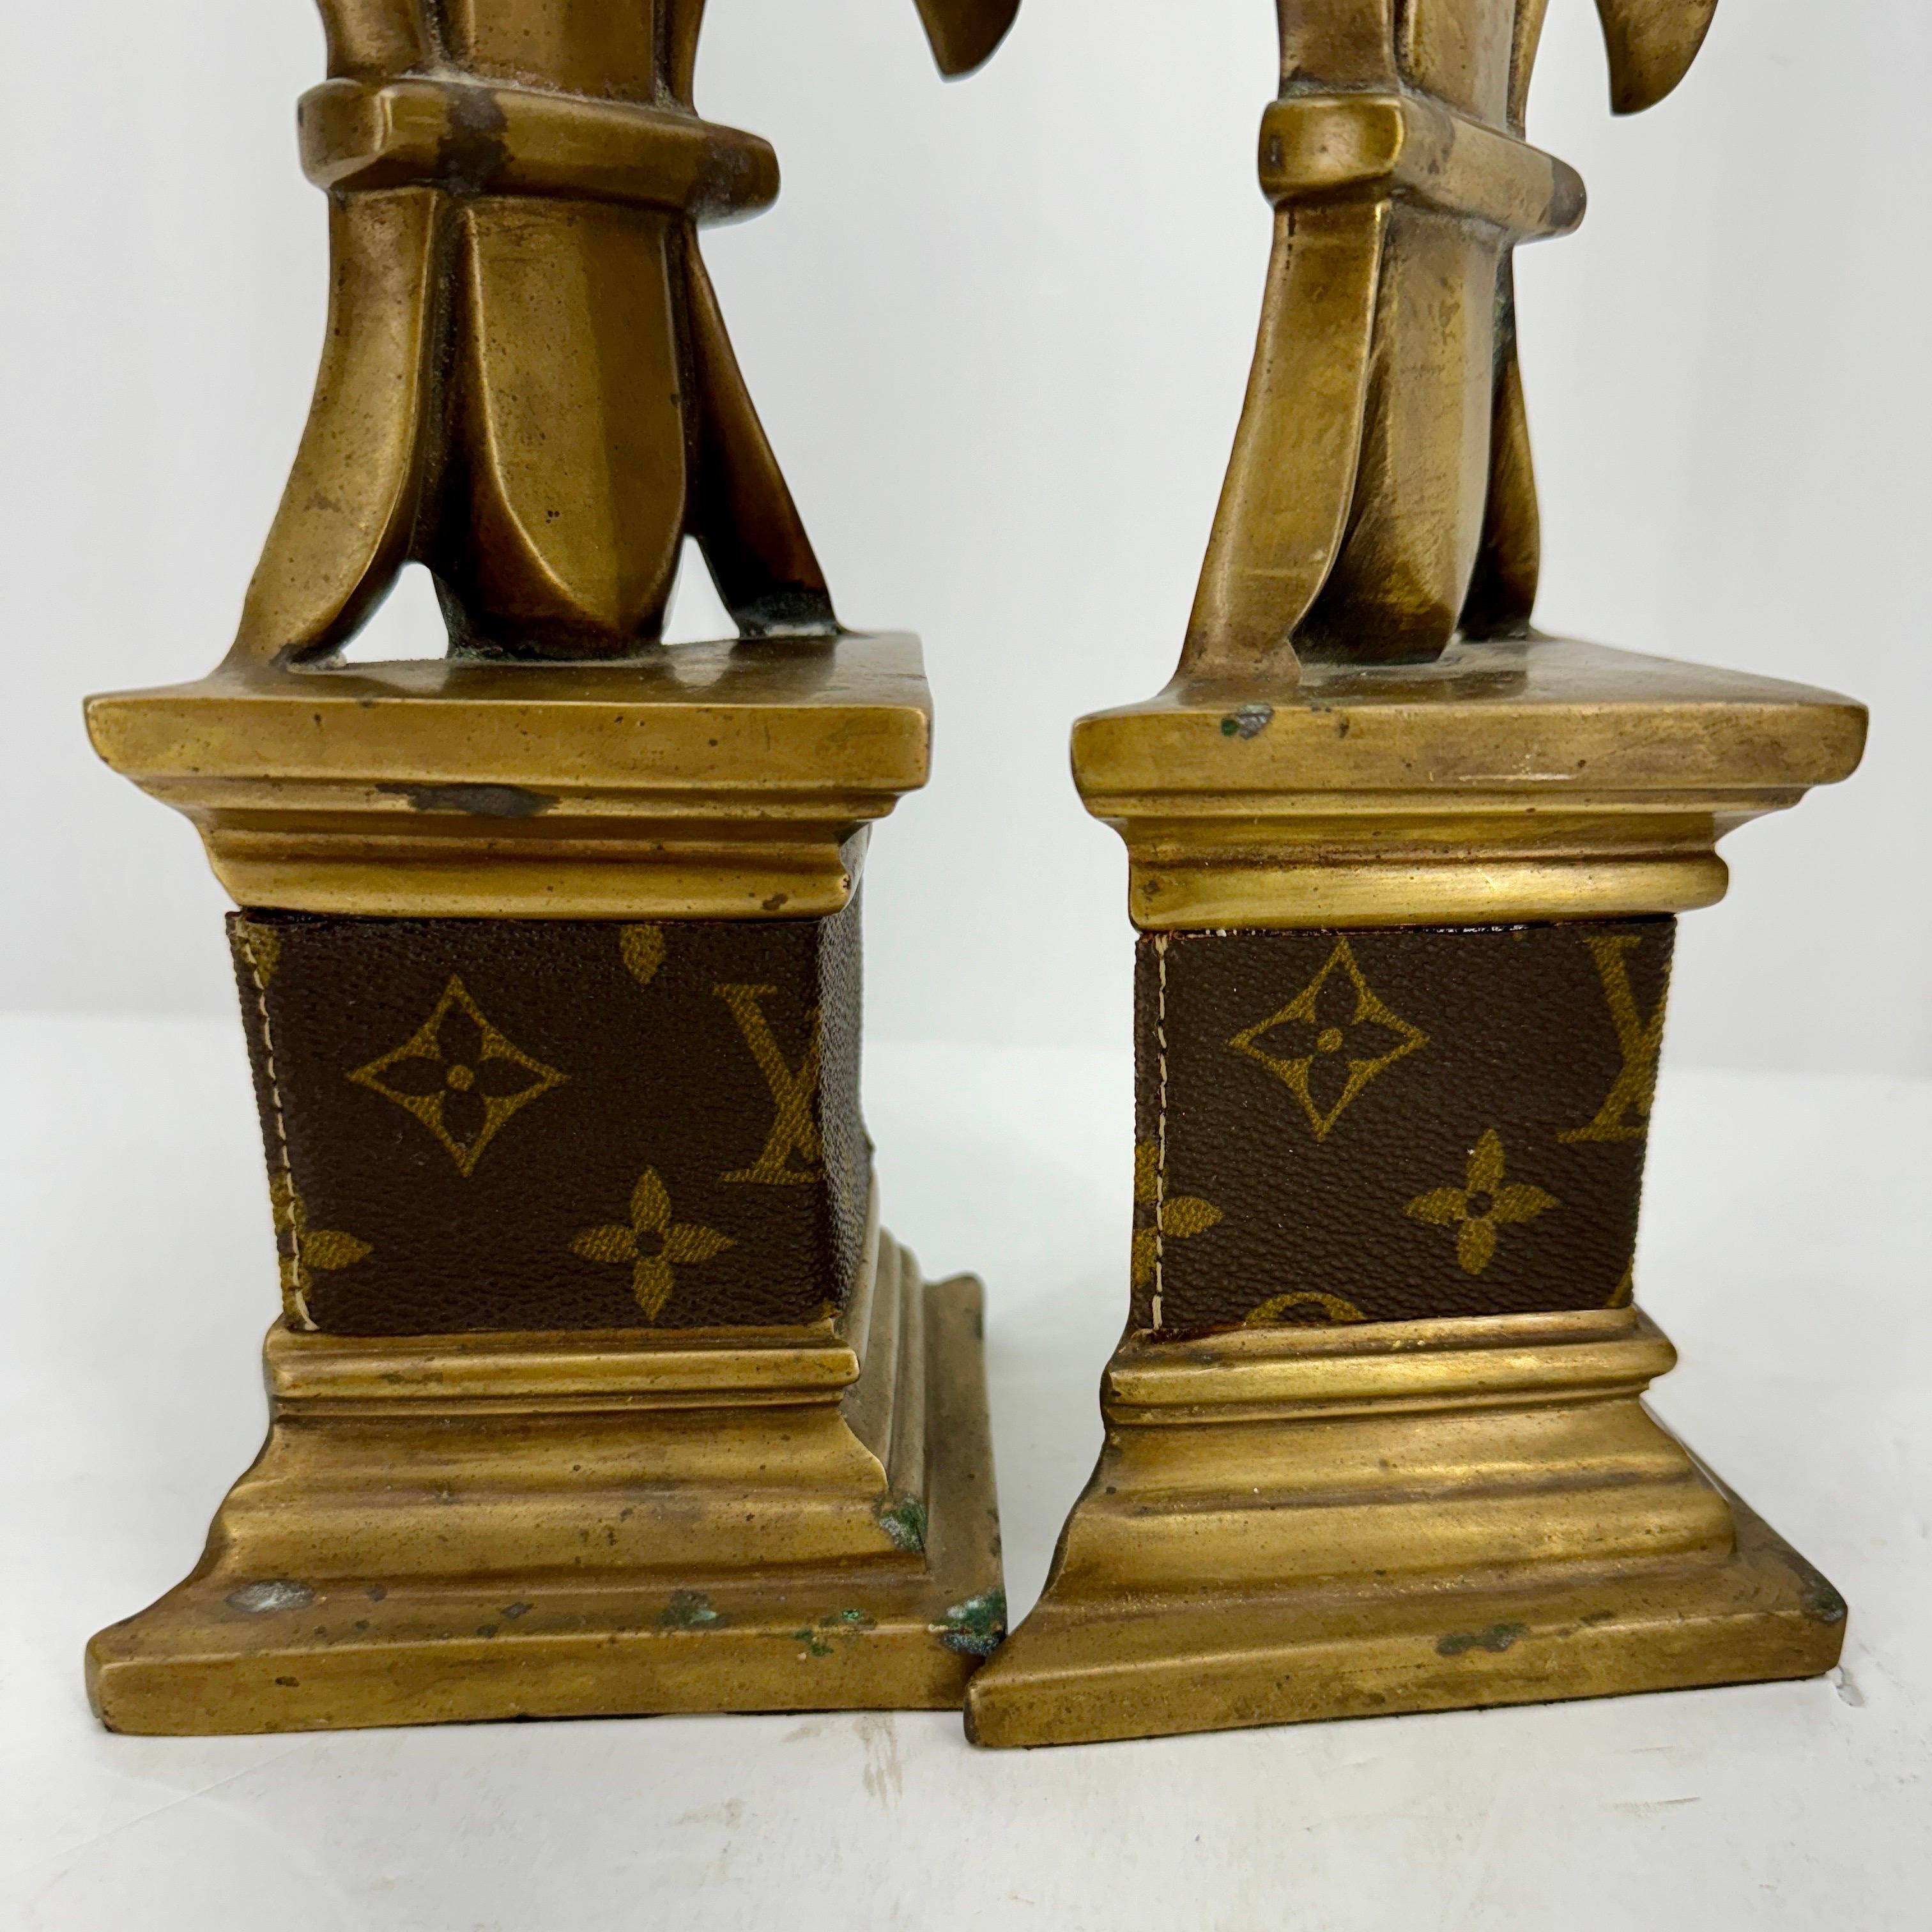  Pair of Mid-Century Brass Bookends with Louis Vuitton Monogram Fabric For Sale 6